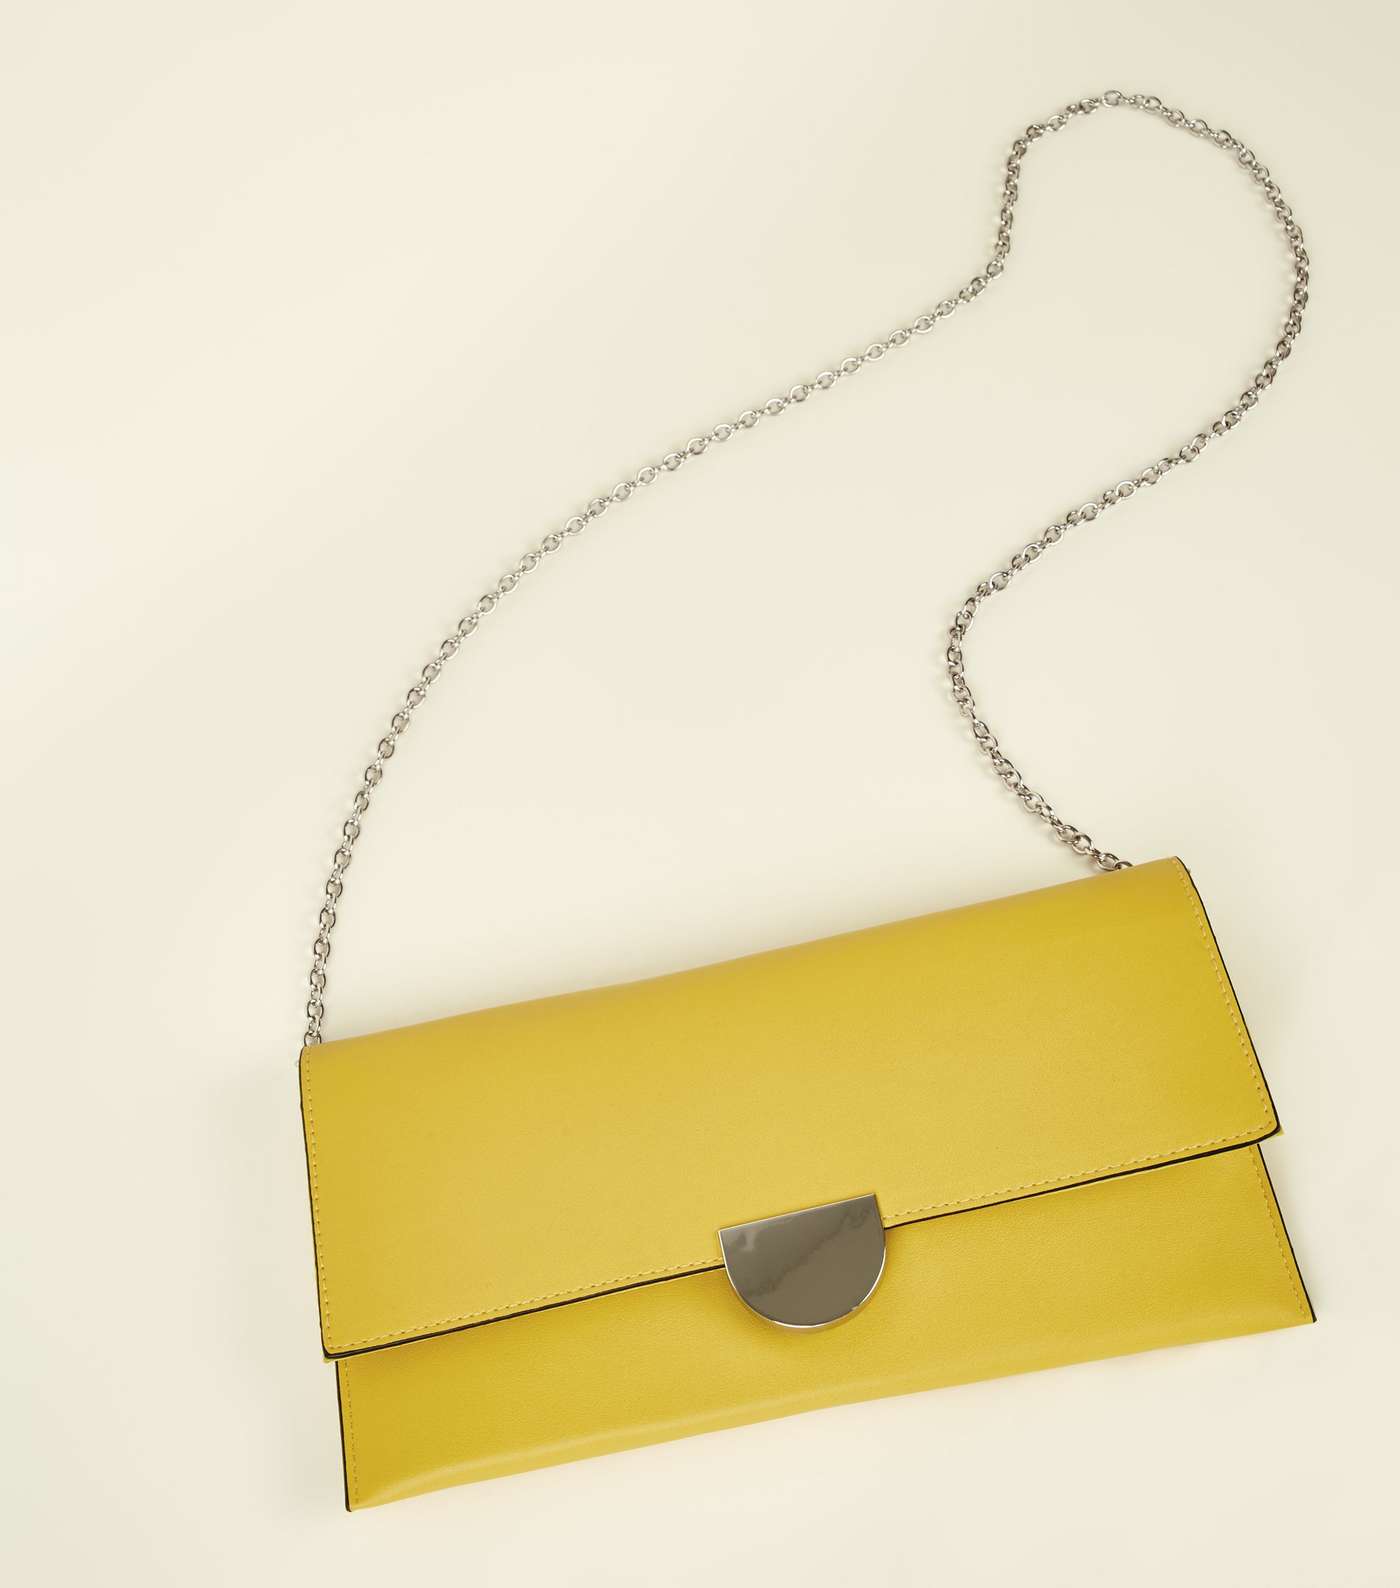 Bright Yellow Leather-Look Clutch Bag  Image 4